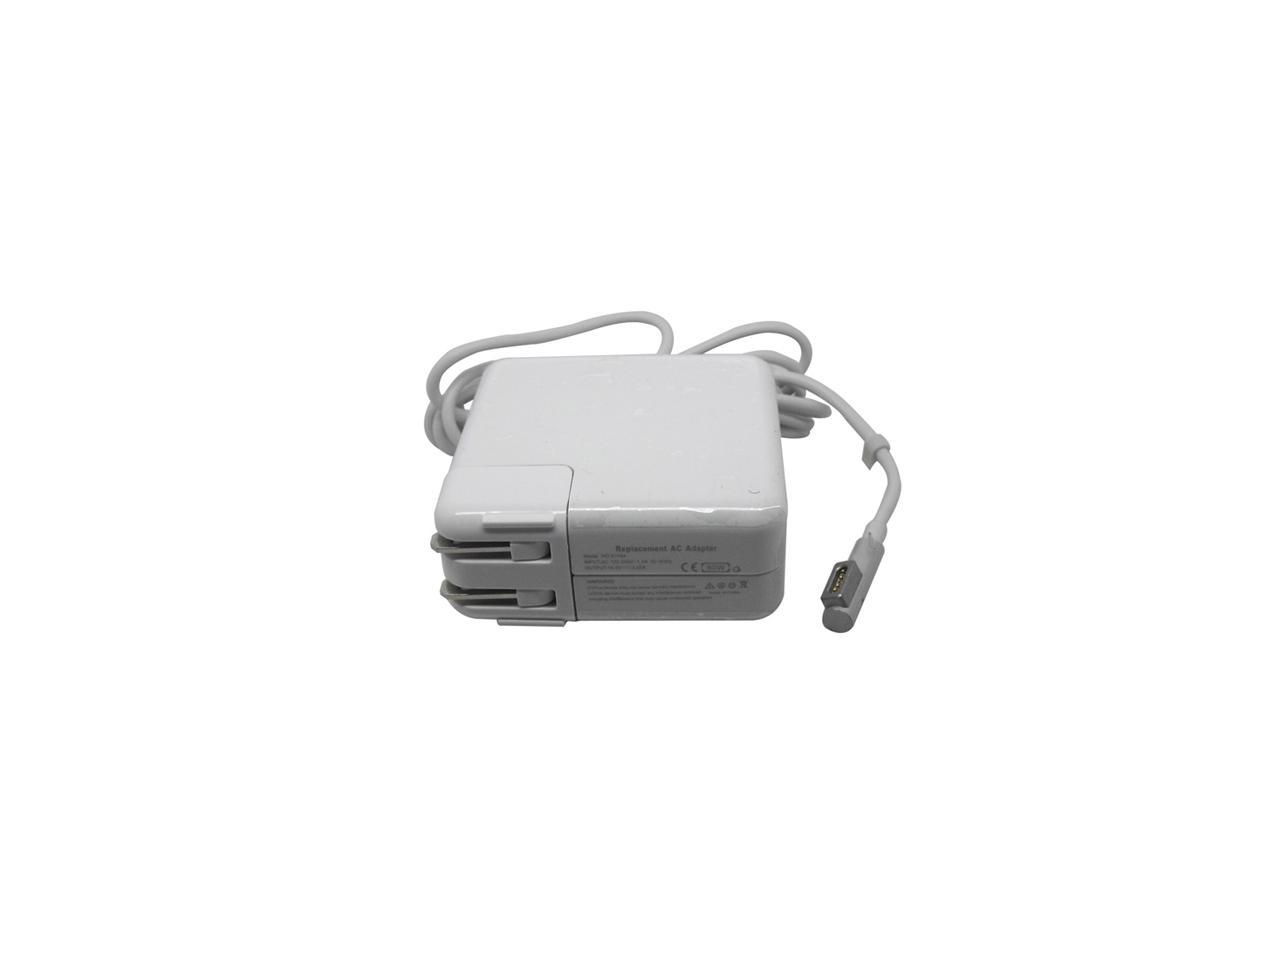 macbook air 13 inch charger price